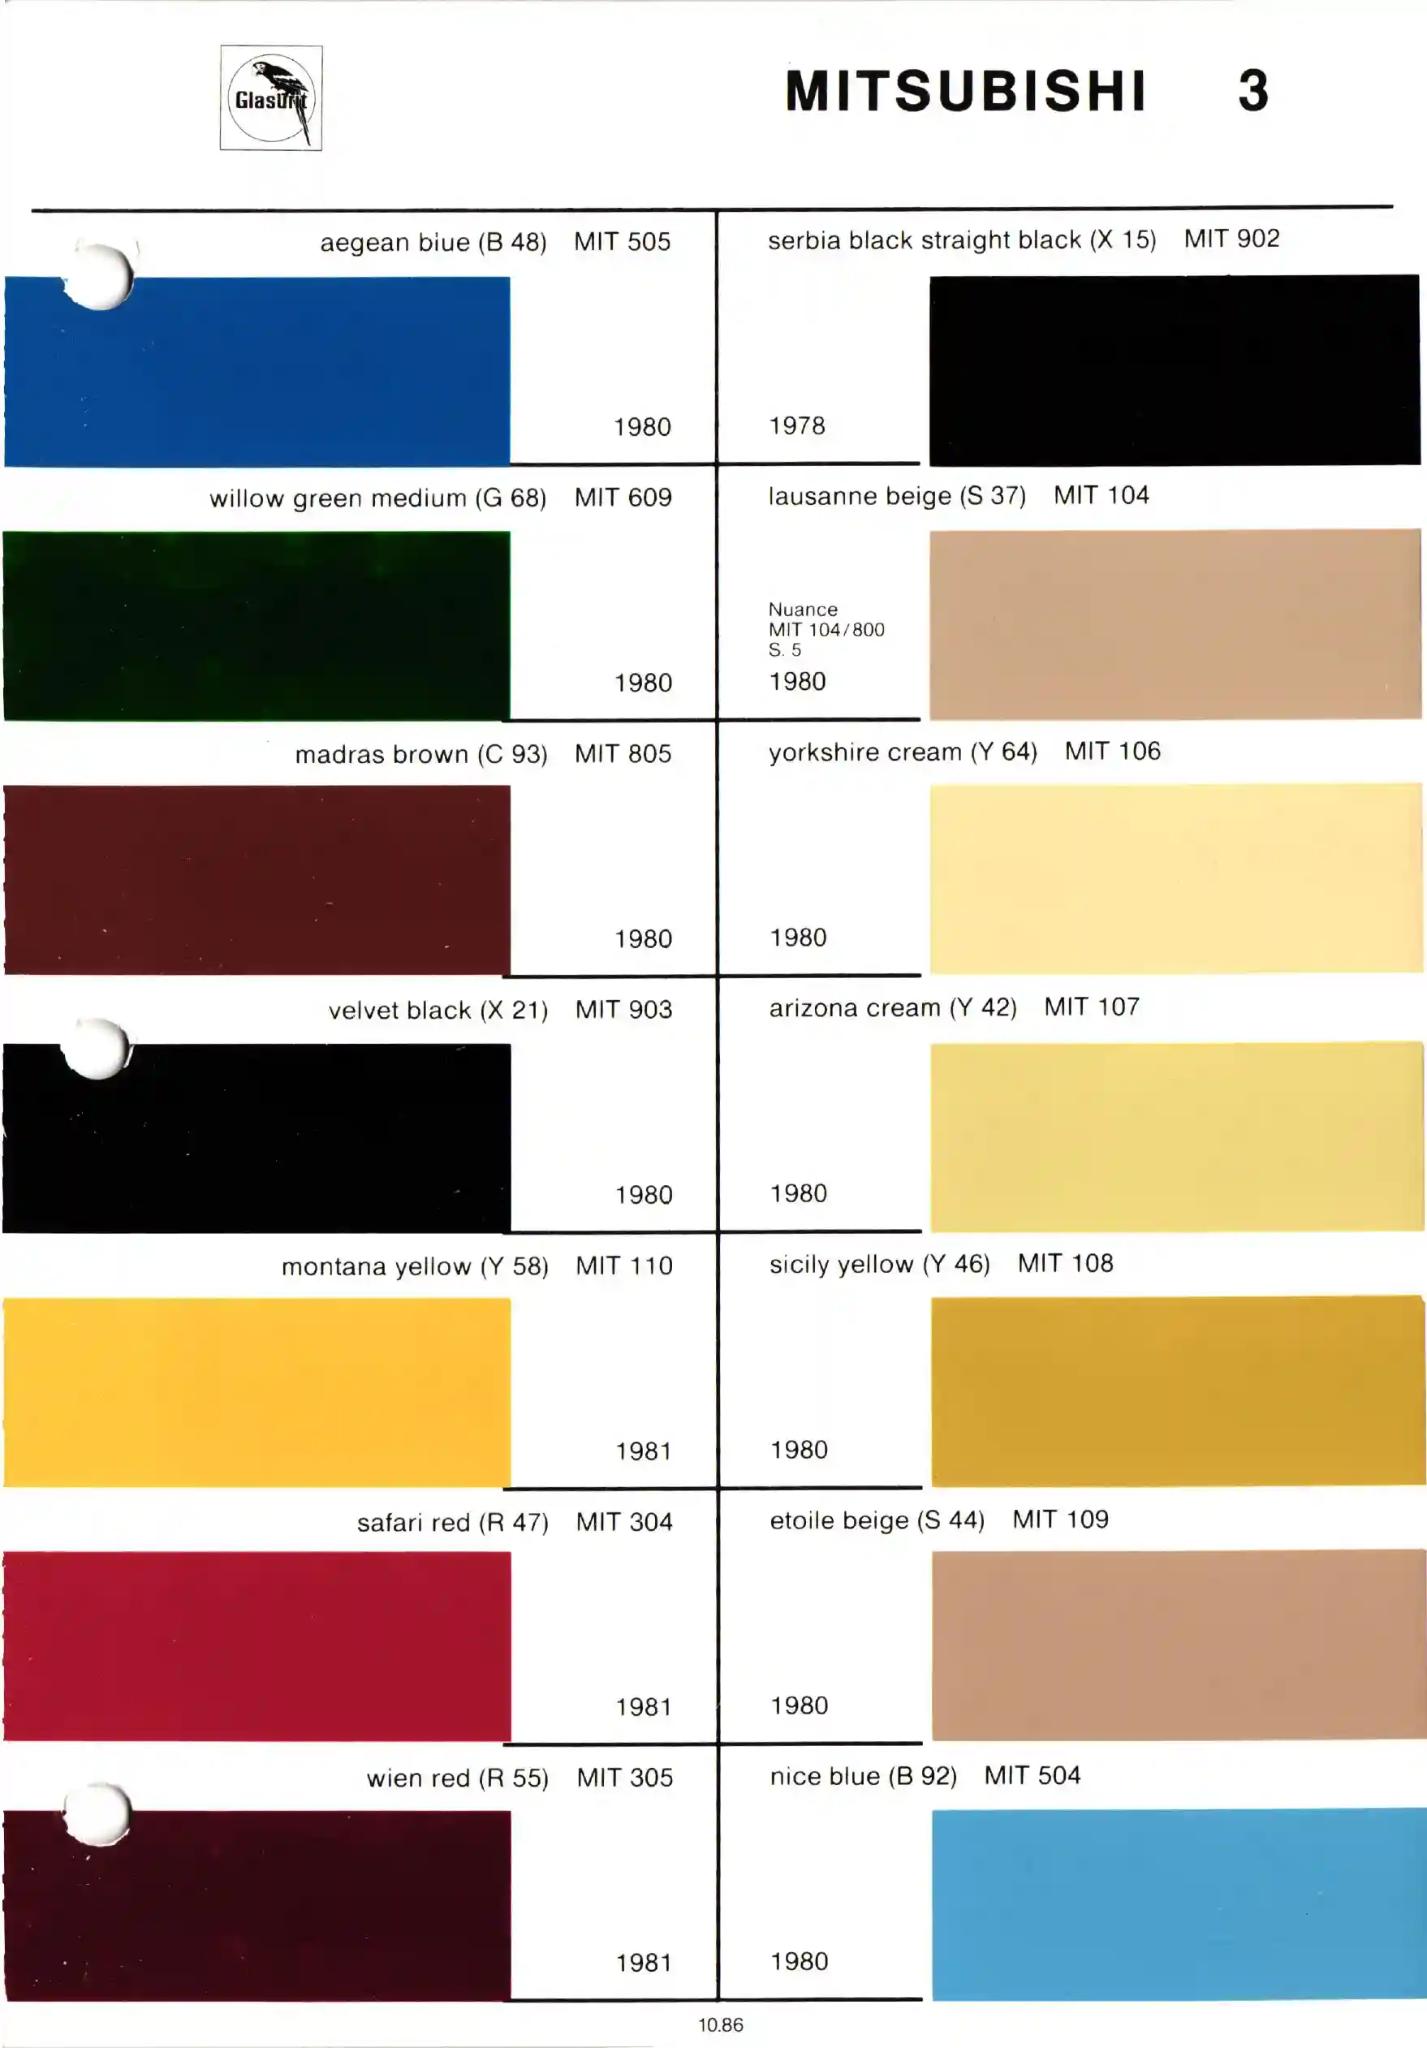 Glasurit Paint Chart of Mitsubishi Colors from 1975 to 1989.  Look up paint codes for historic vehicles.